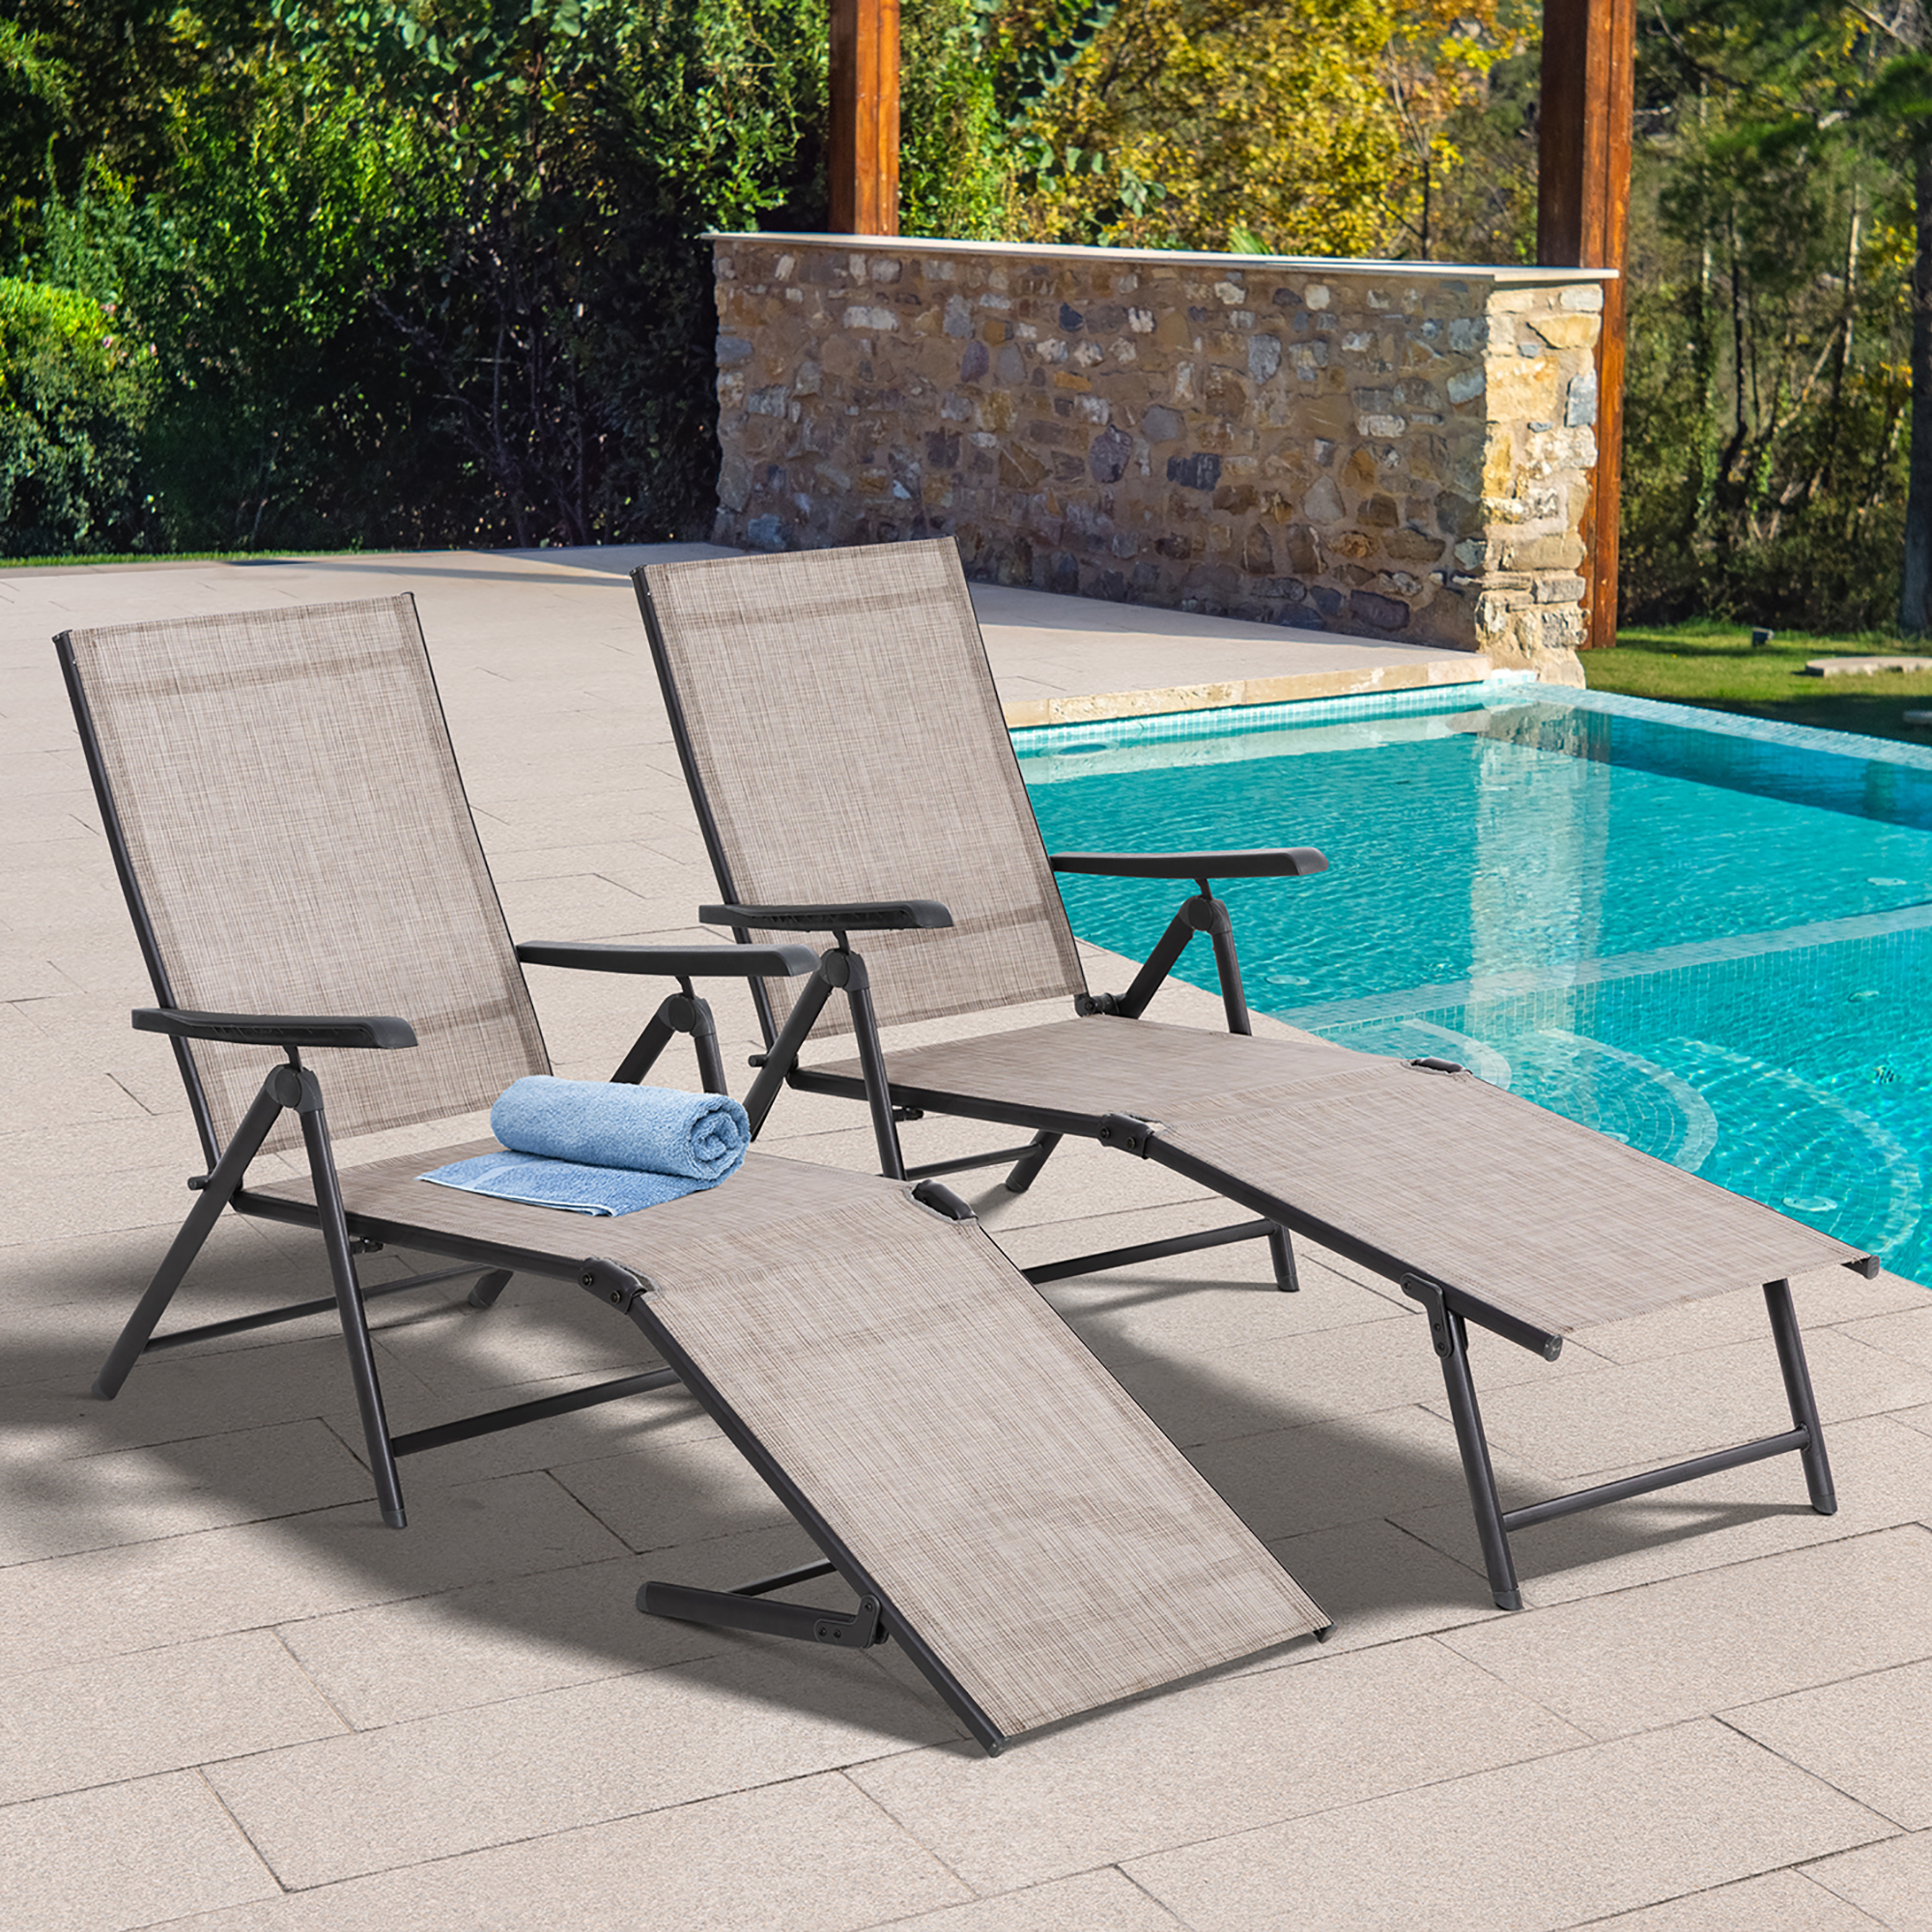 Sobaniilo Patio Chaise Lounge Chairs Set of 2, Outdoor Adjustable Steel Textiline Folding Reclining Chairs, Brown - image 1 of 7